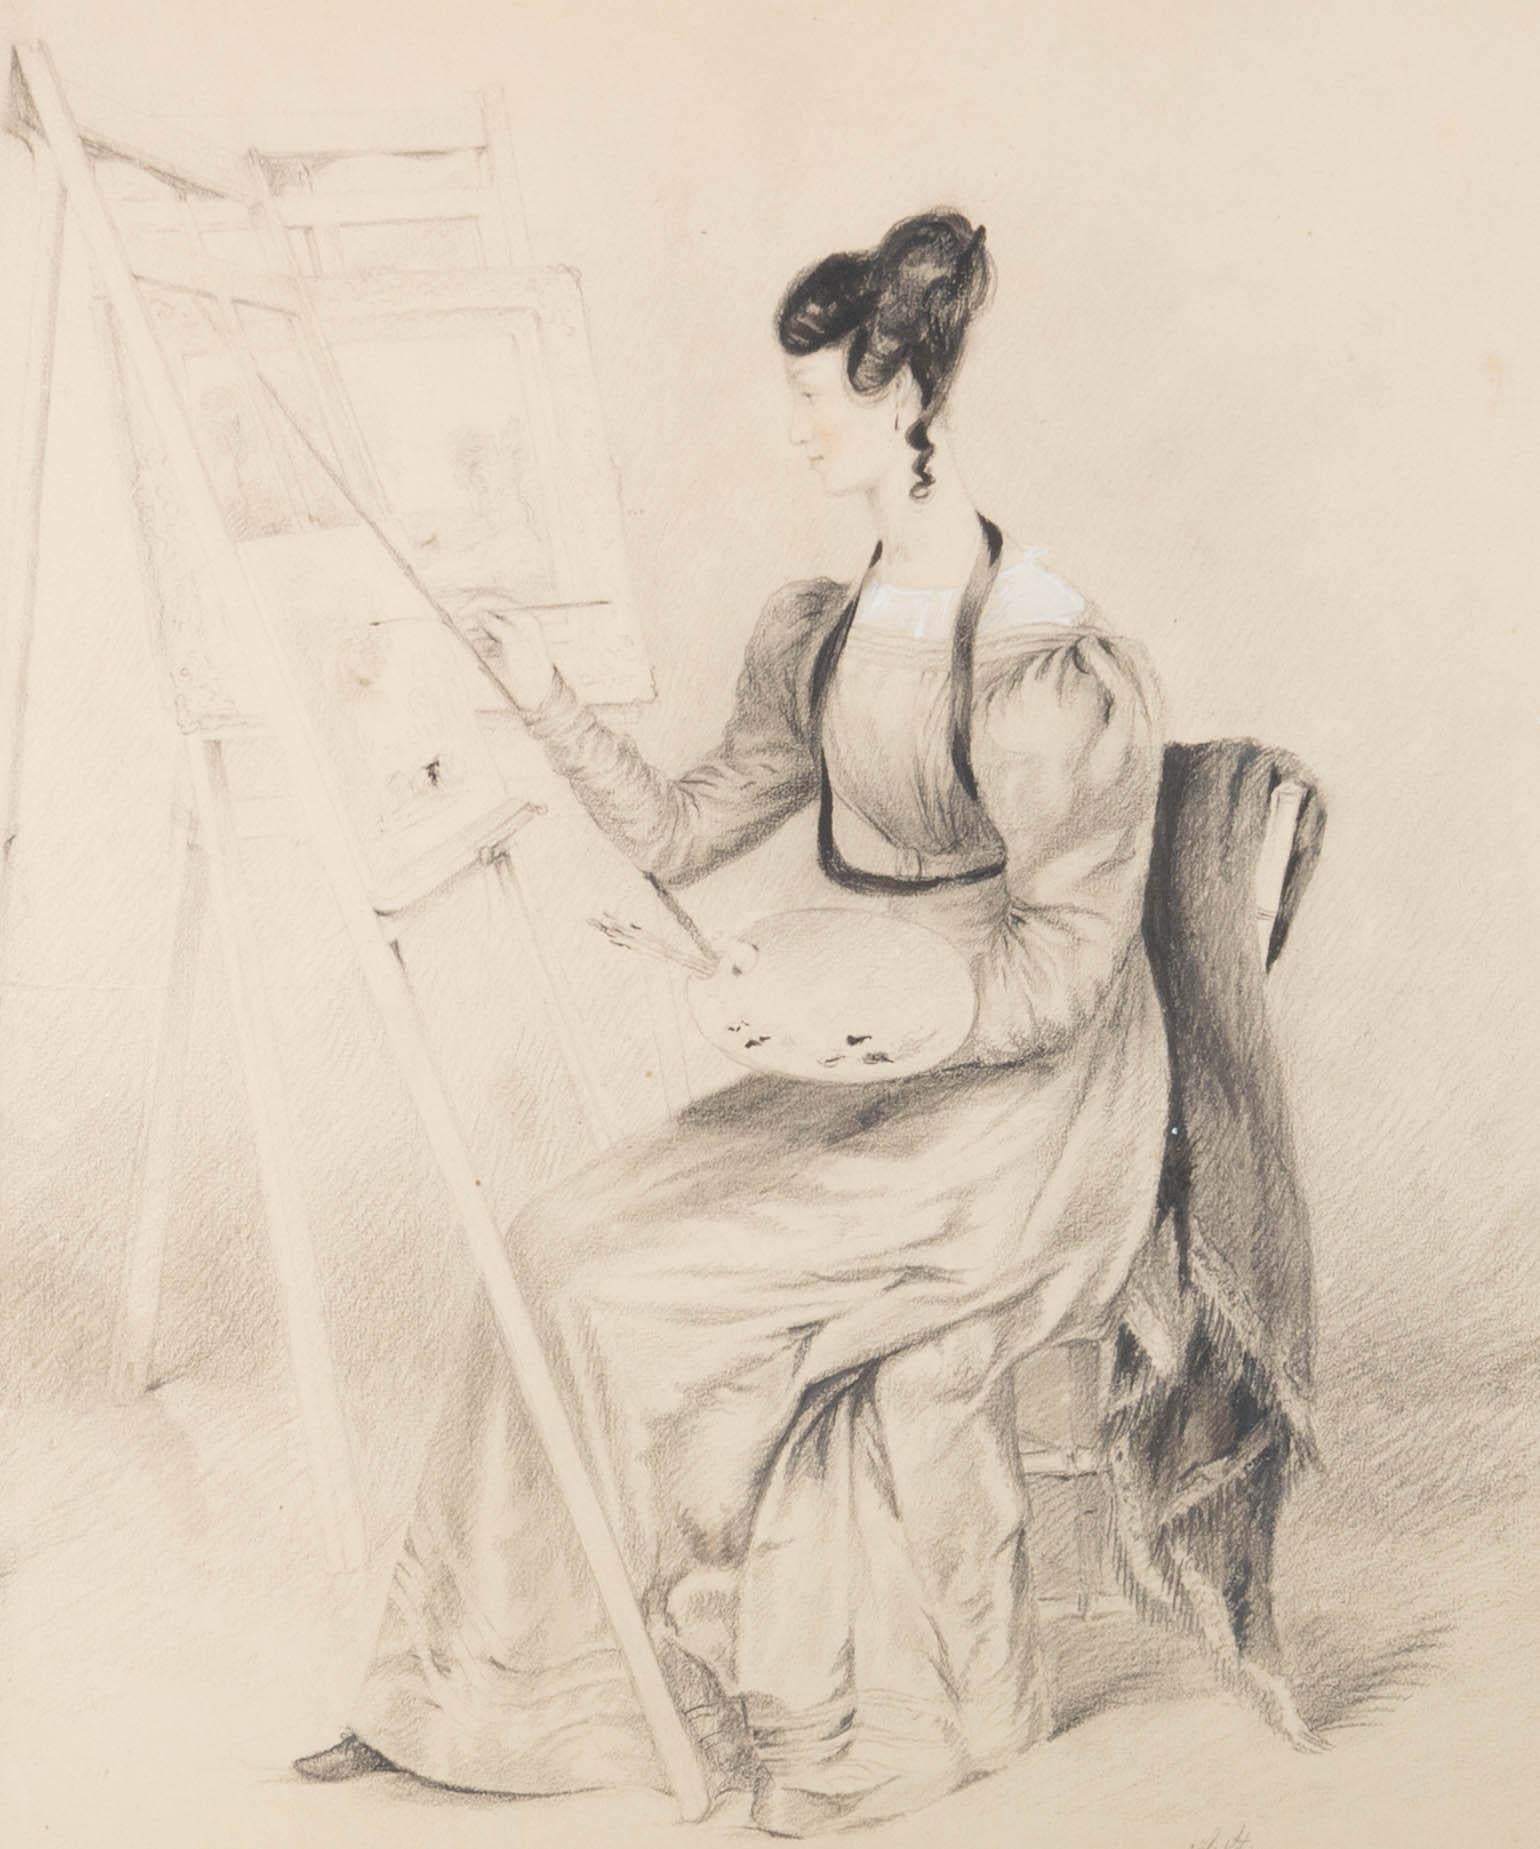 A charcoal drawing with watercolour details of a lady sat painting at an easel. The portrait has an unusual and affectionate informality, perhaps suggesting that the artist was a relation of the sitter. Presented glazed in a blue mount with gold